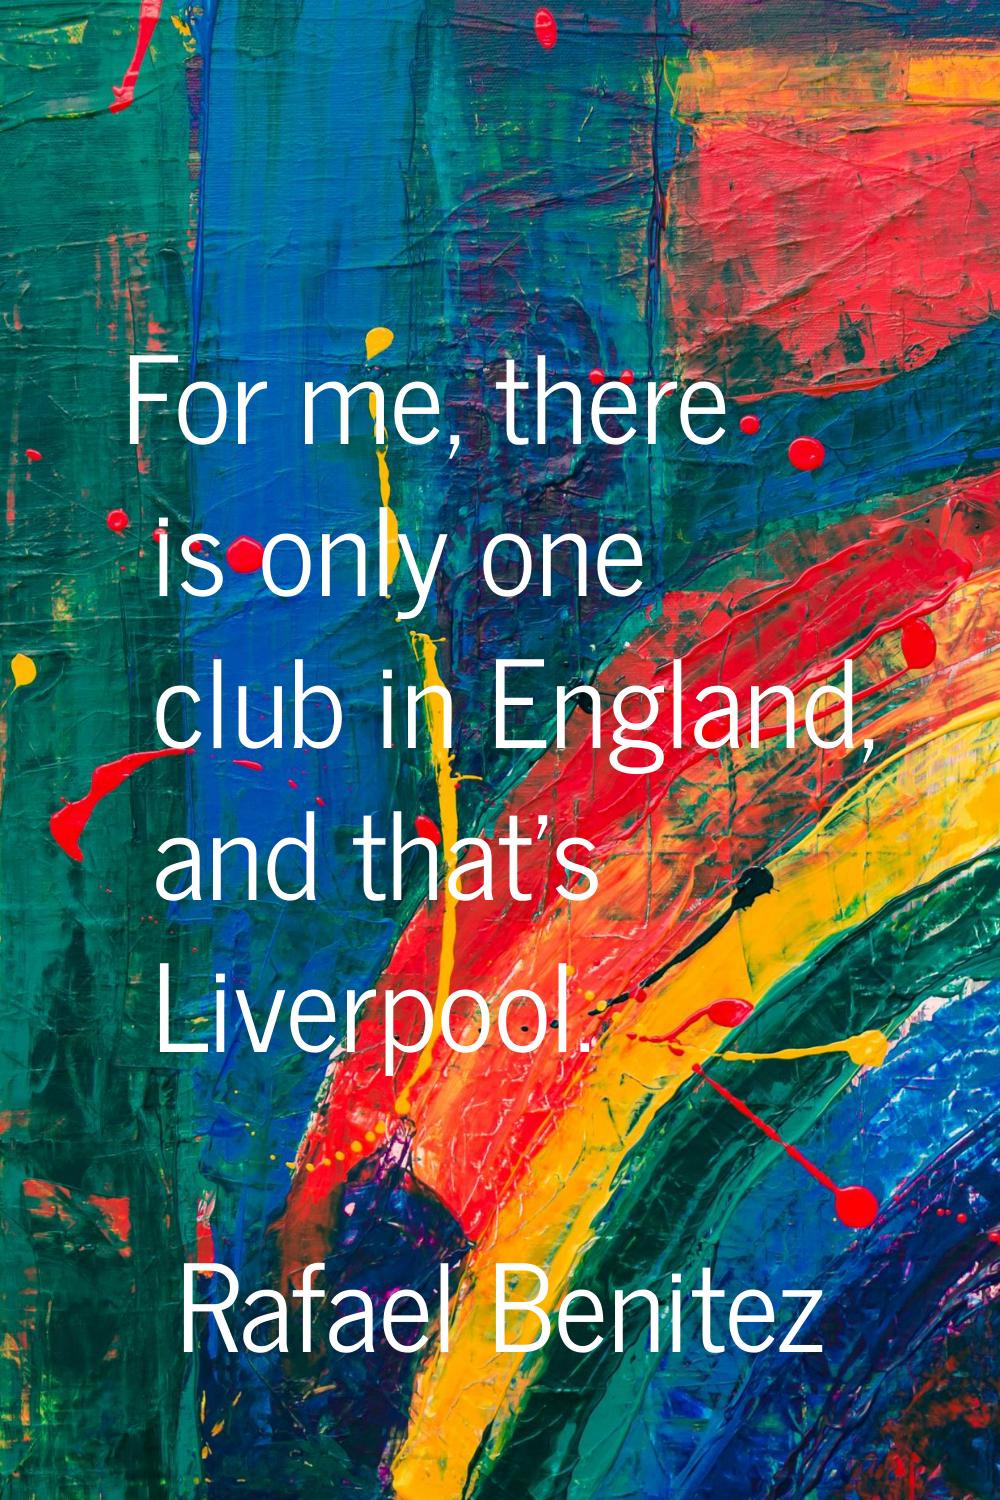 For me, there is only one club in England, and that's Liverpool.